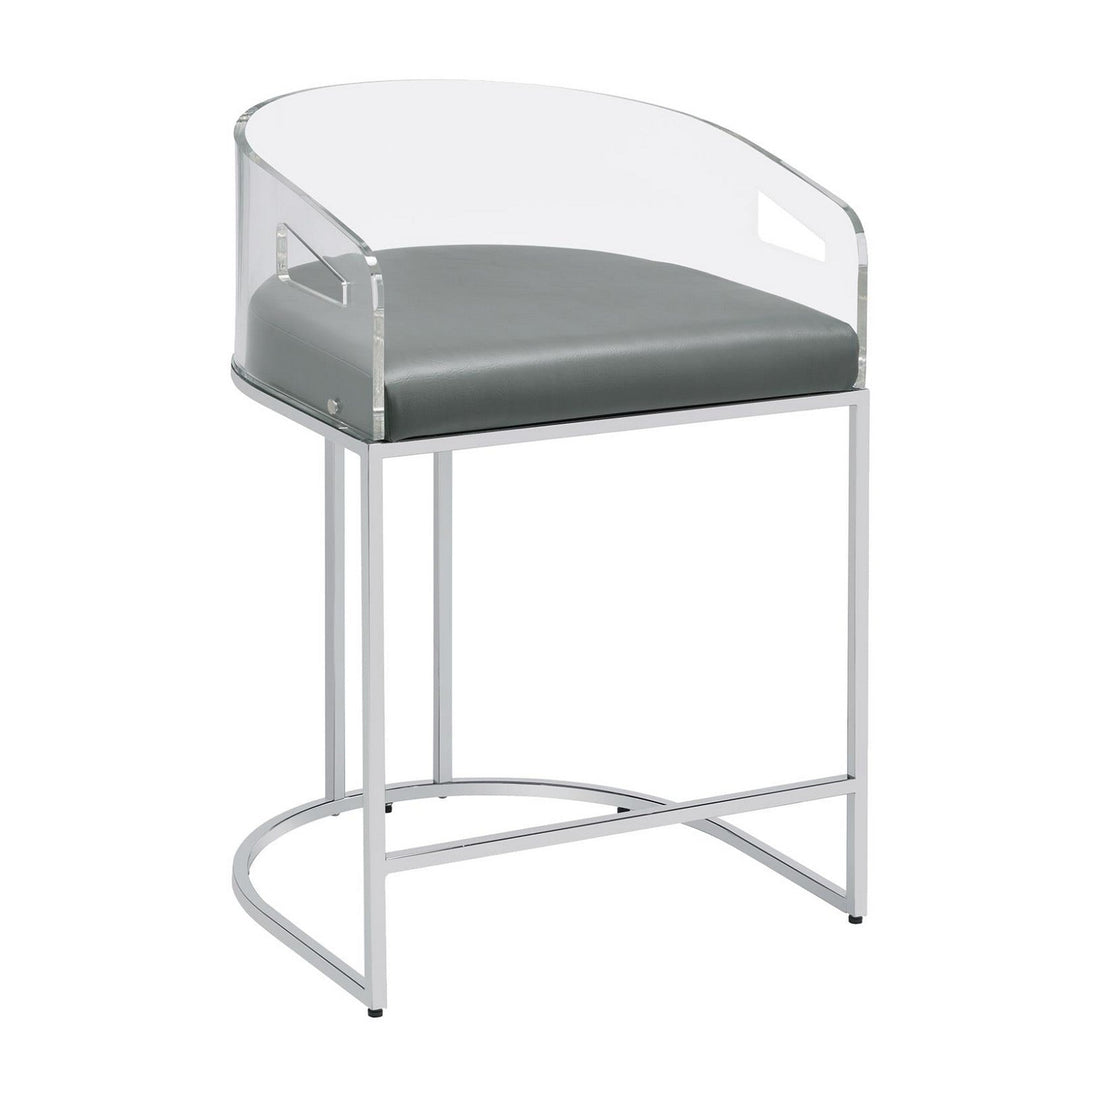 Thermosolis Acrylic Back Counter Height Stools Grey and Chrome (Set of 2) 183405